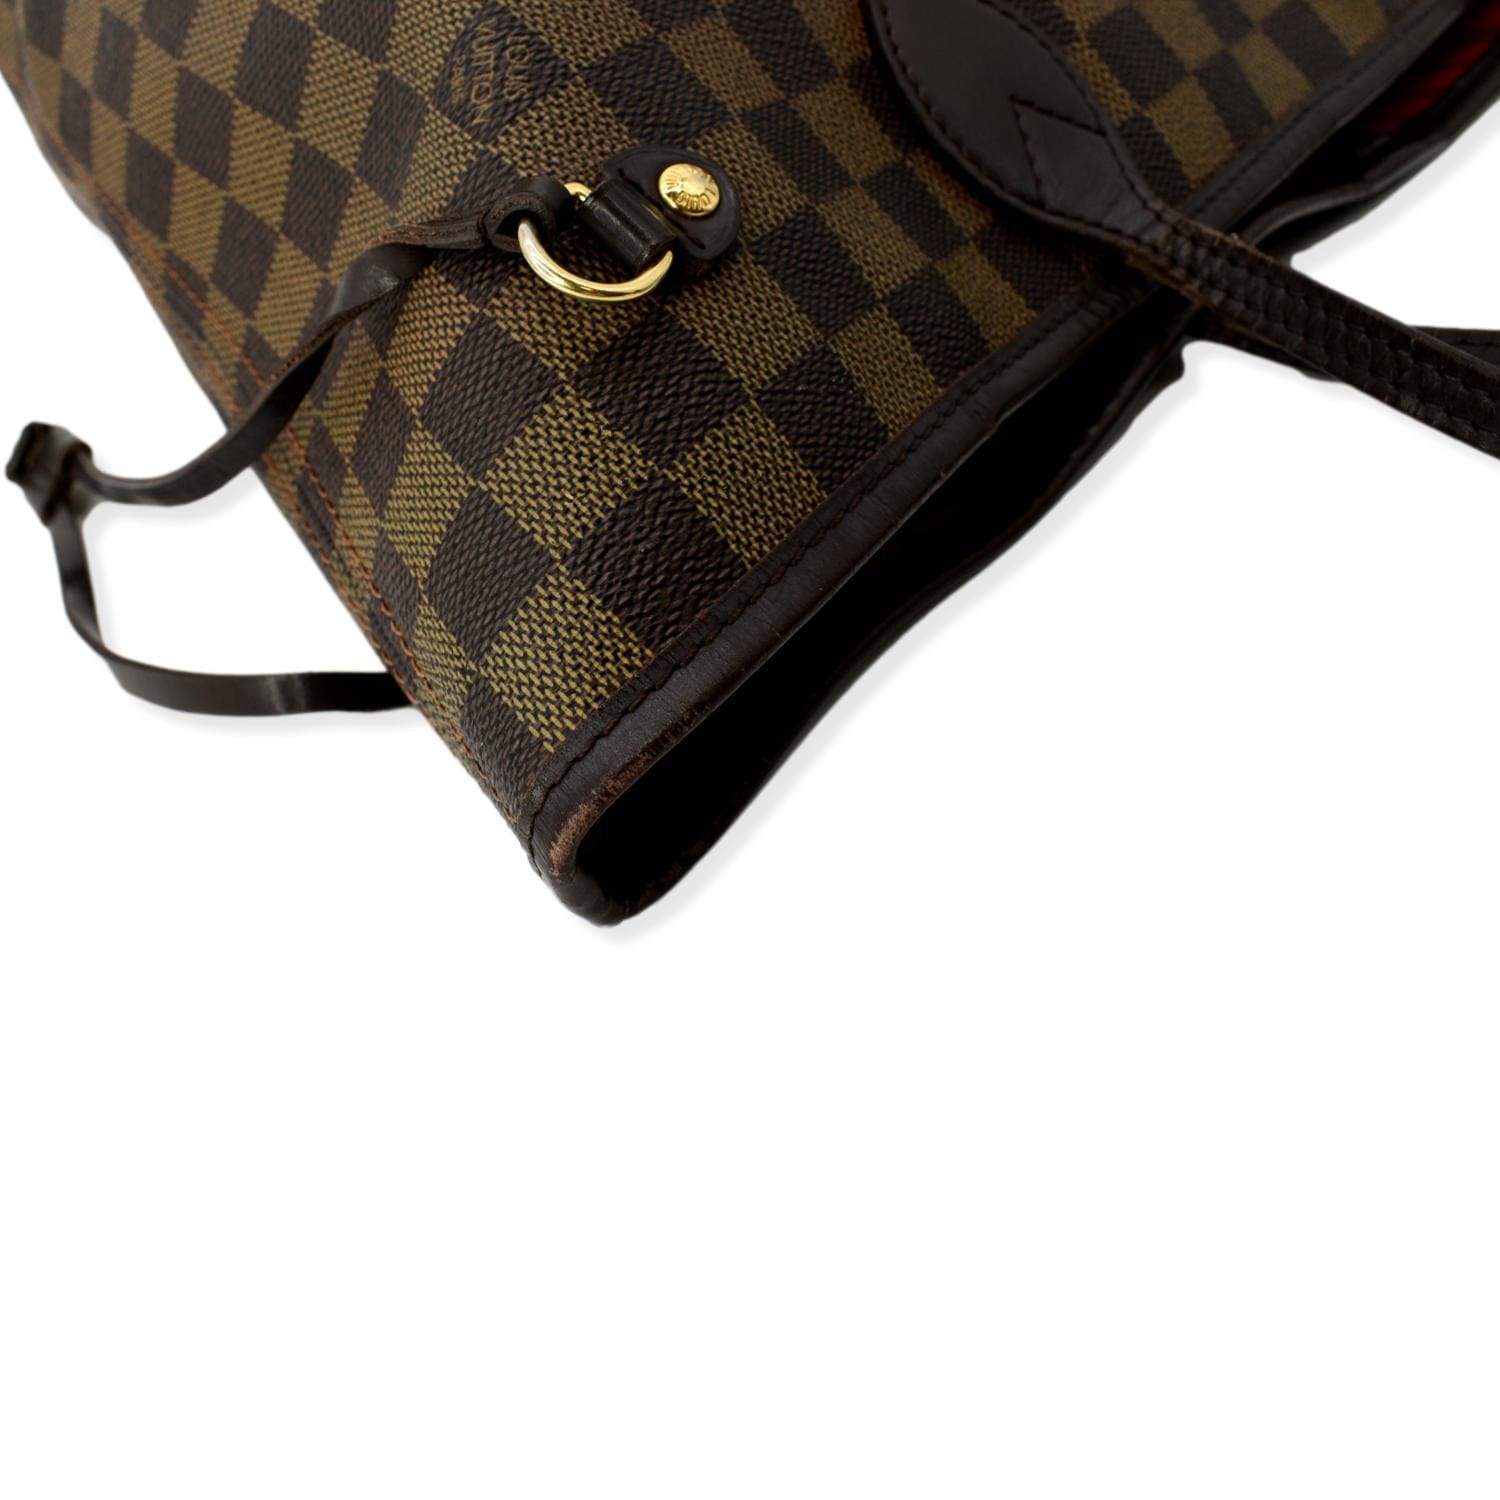 Louis Vuitton Neverfull Mm Brown Damier Ebene Canvas Tote